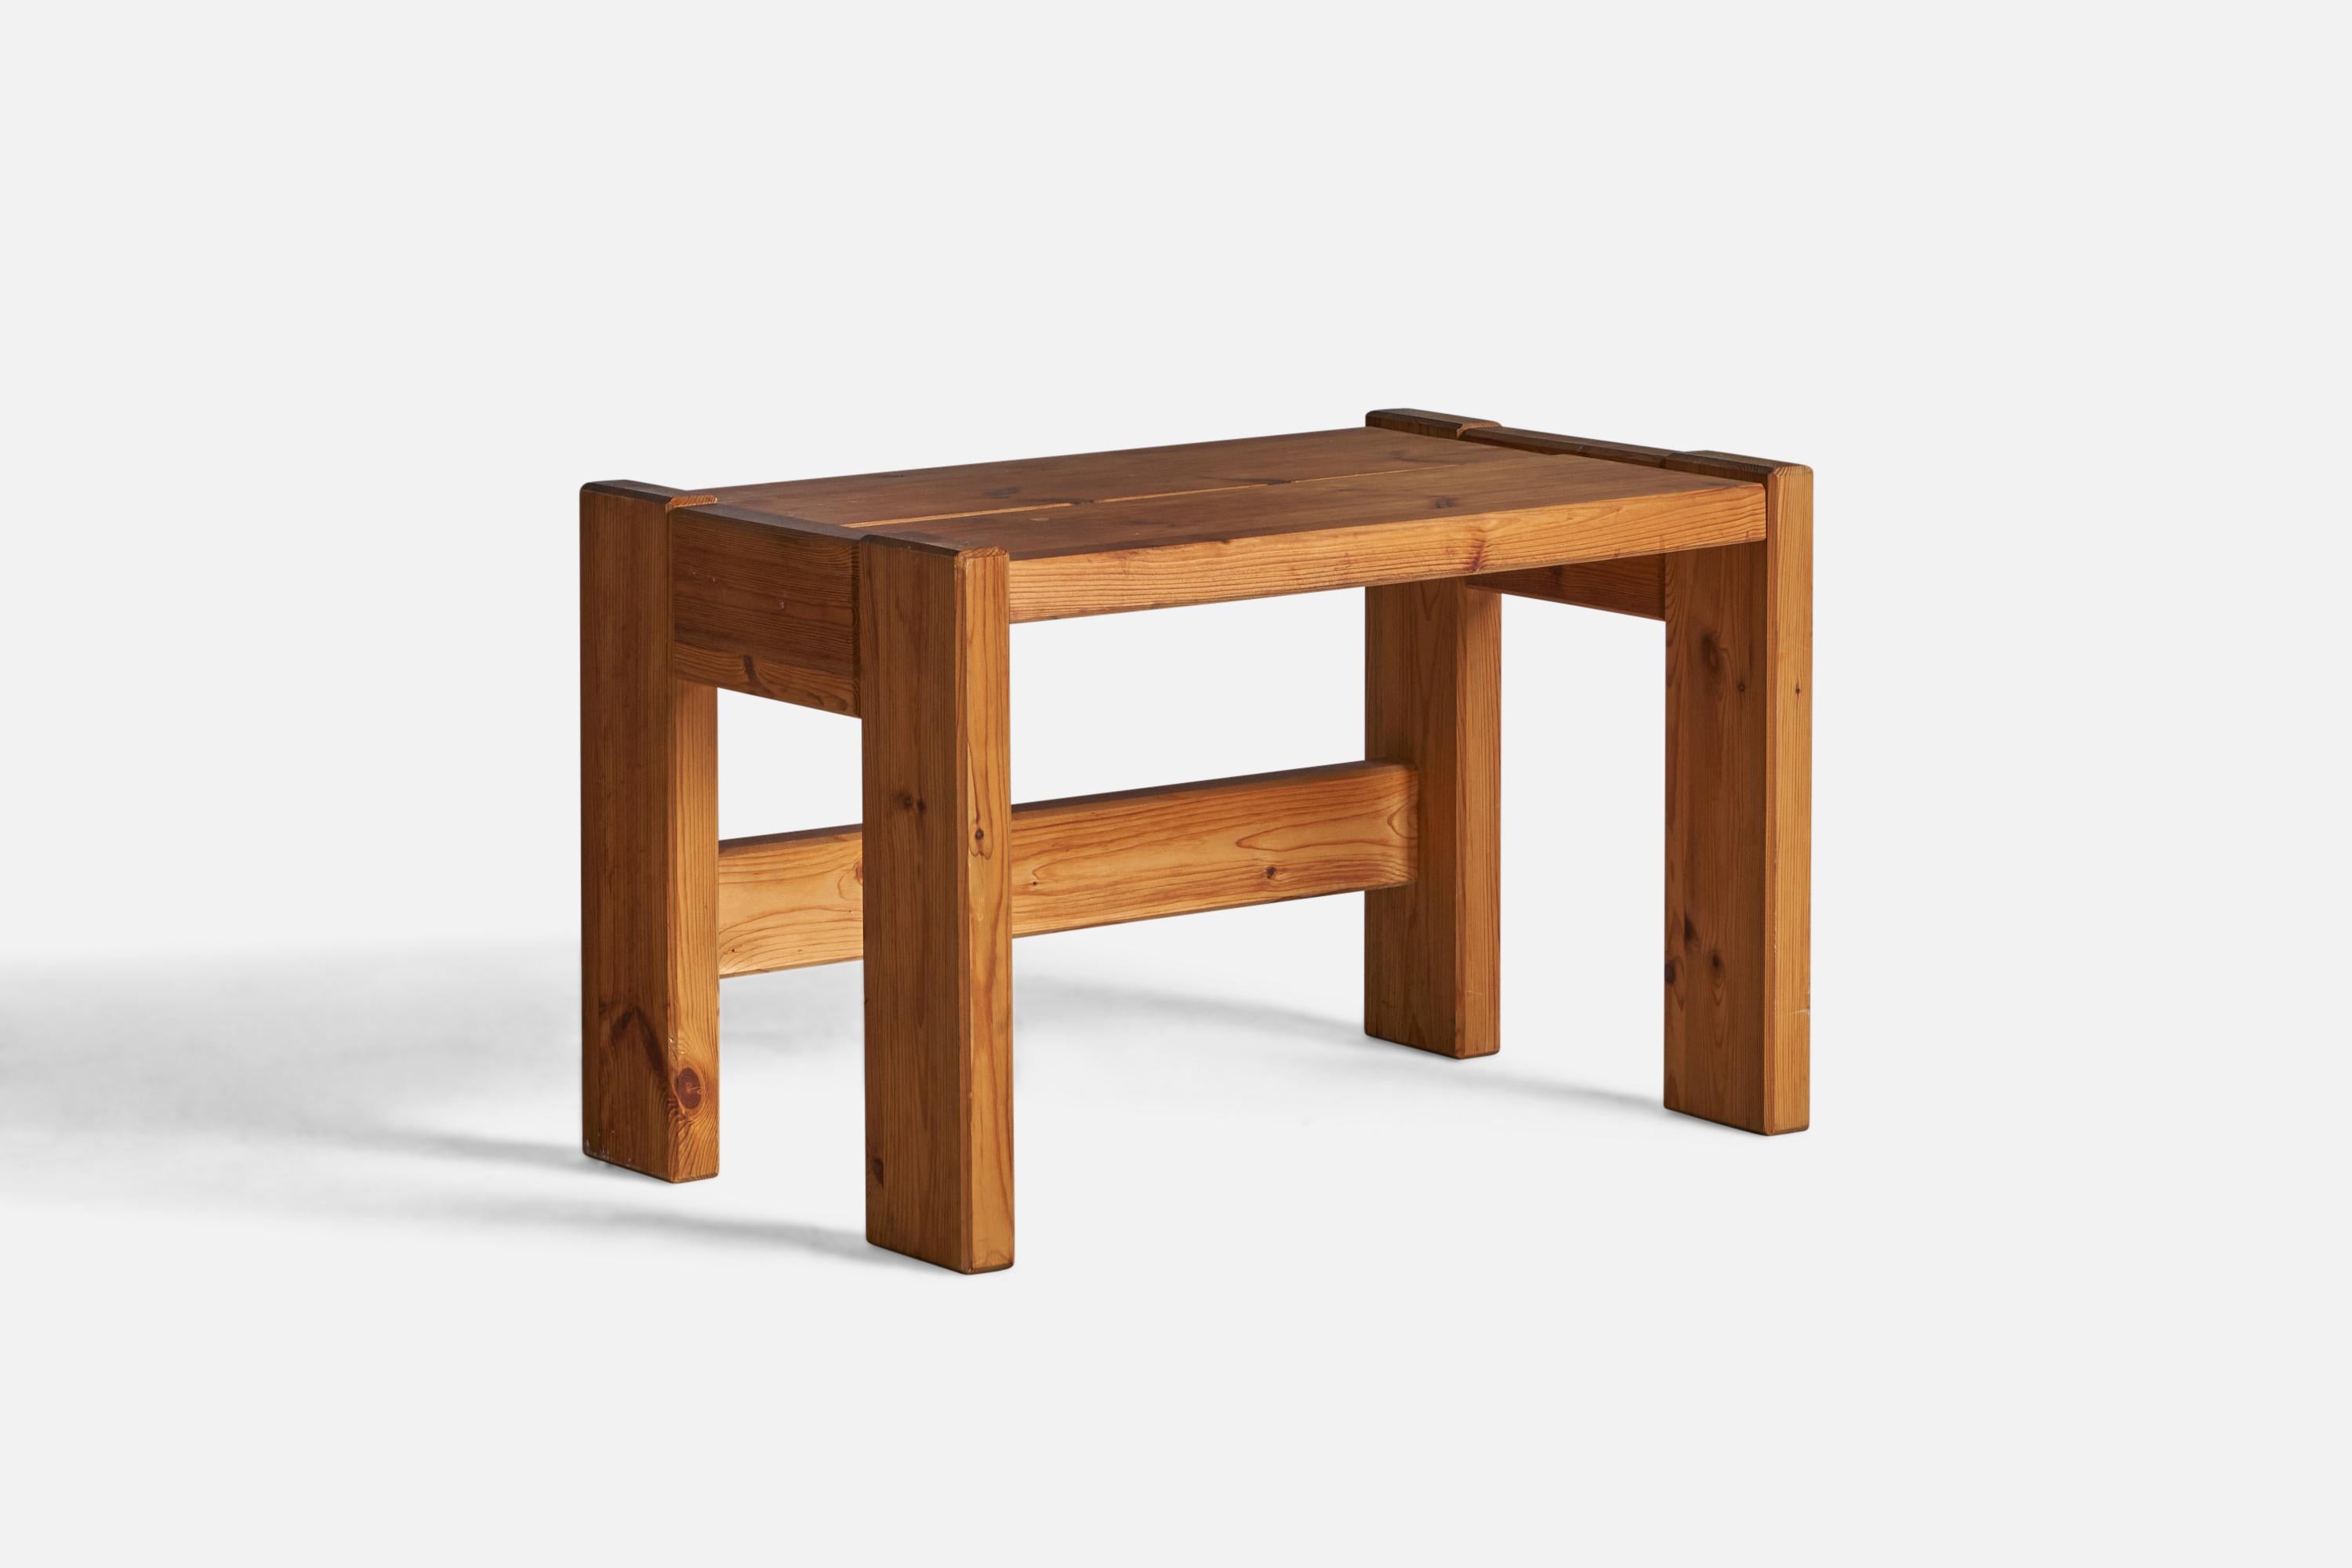 A sizeable pine side table designed and produced in Sweden, 1970s.